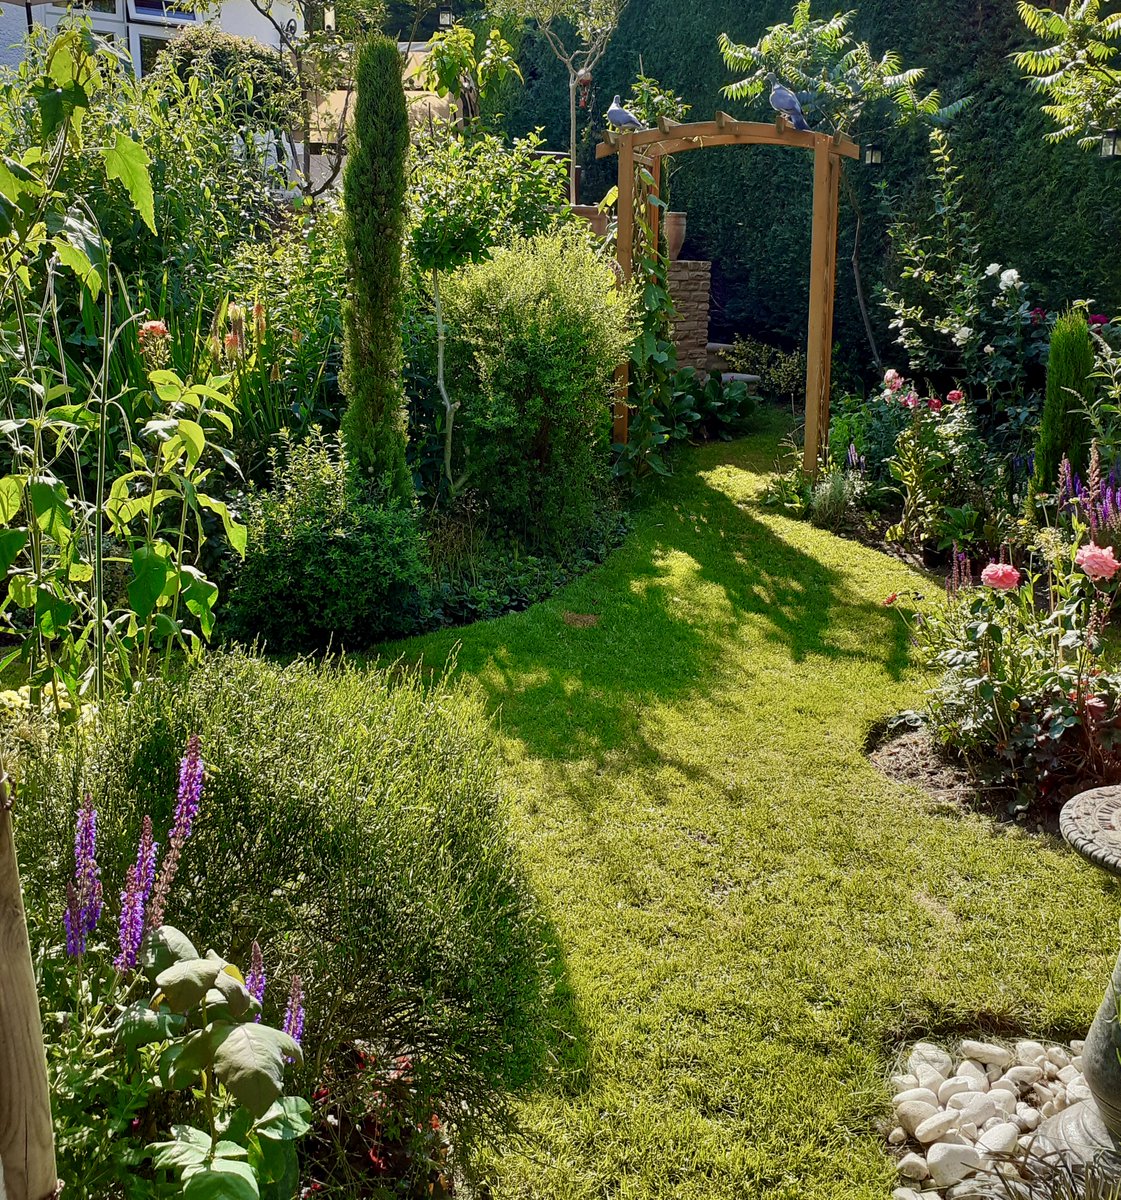 On @tobybuckland's superb radio show for #gardeners, Sun 10am - 2, @BBCDevon - I'll explain how home garden can easily help with Britain's Nature Recovery. Whether formal, wild, tidy, or a patio or balcony full of pot plants. Tune in on @bbcsounds from anywhere #GardenersWorld